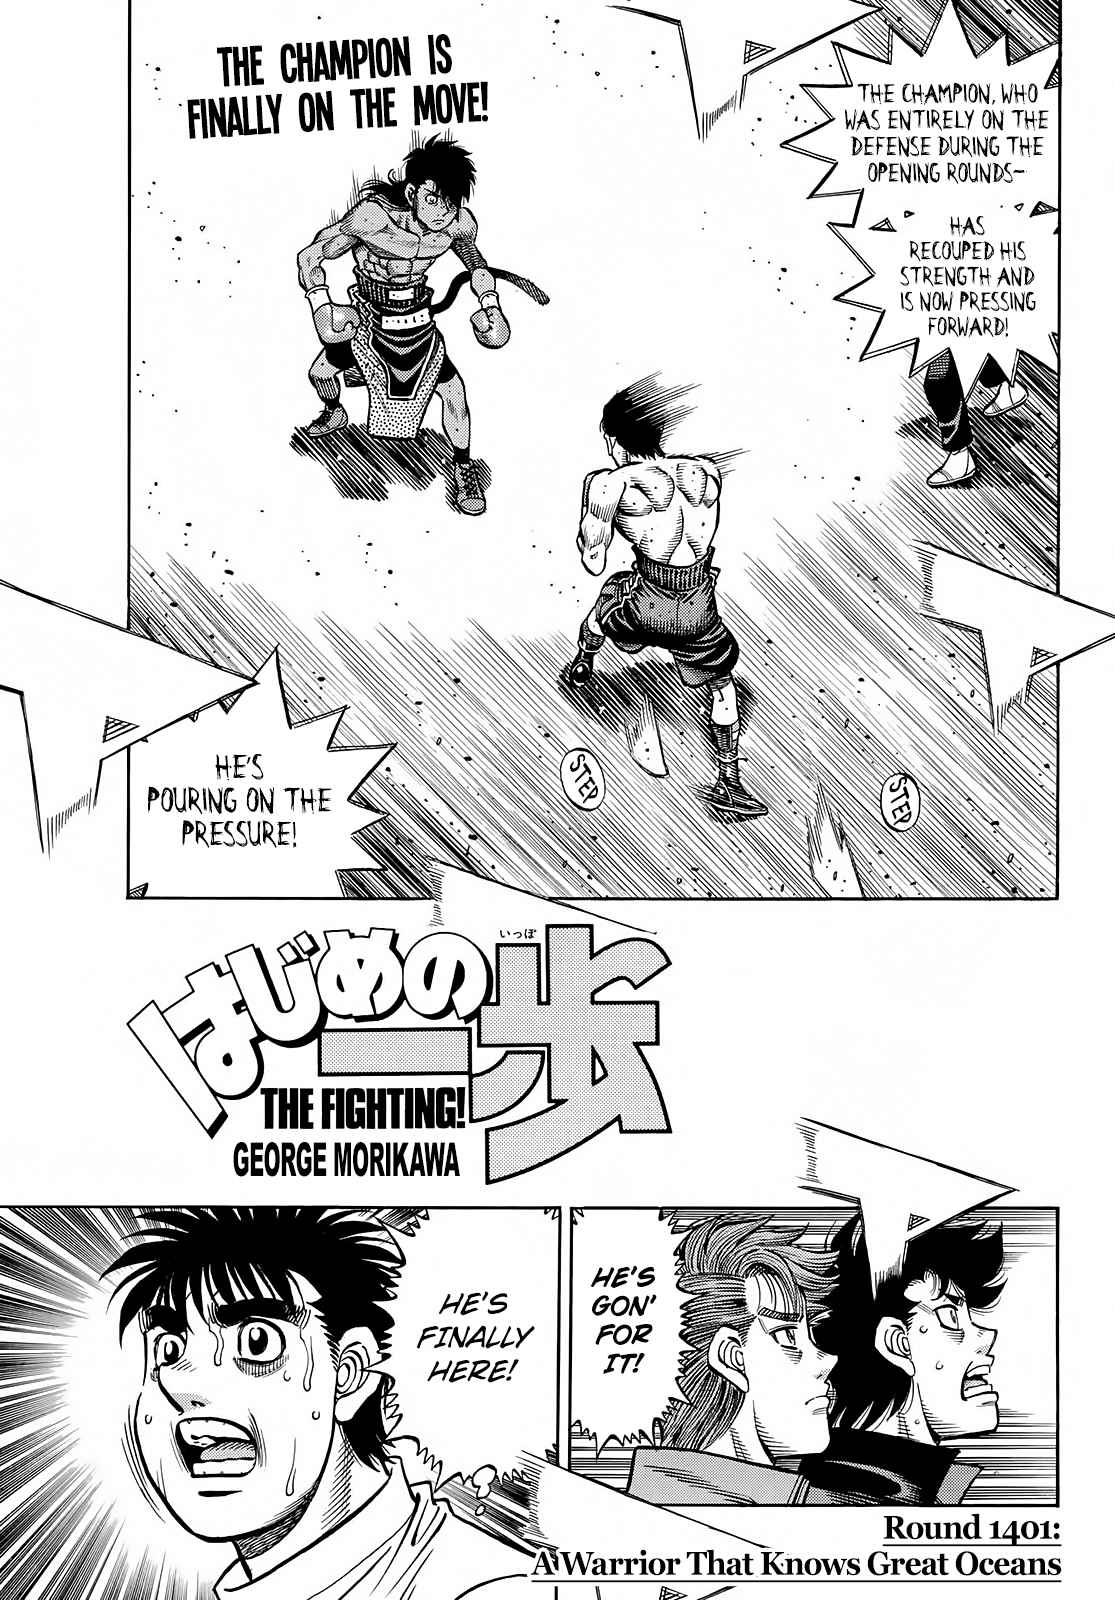 Hajime no Ippo - The First Step 1401